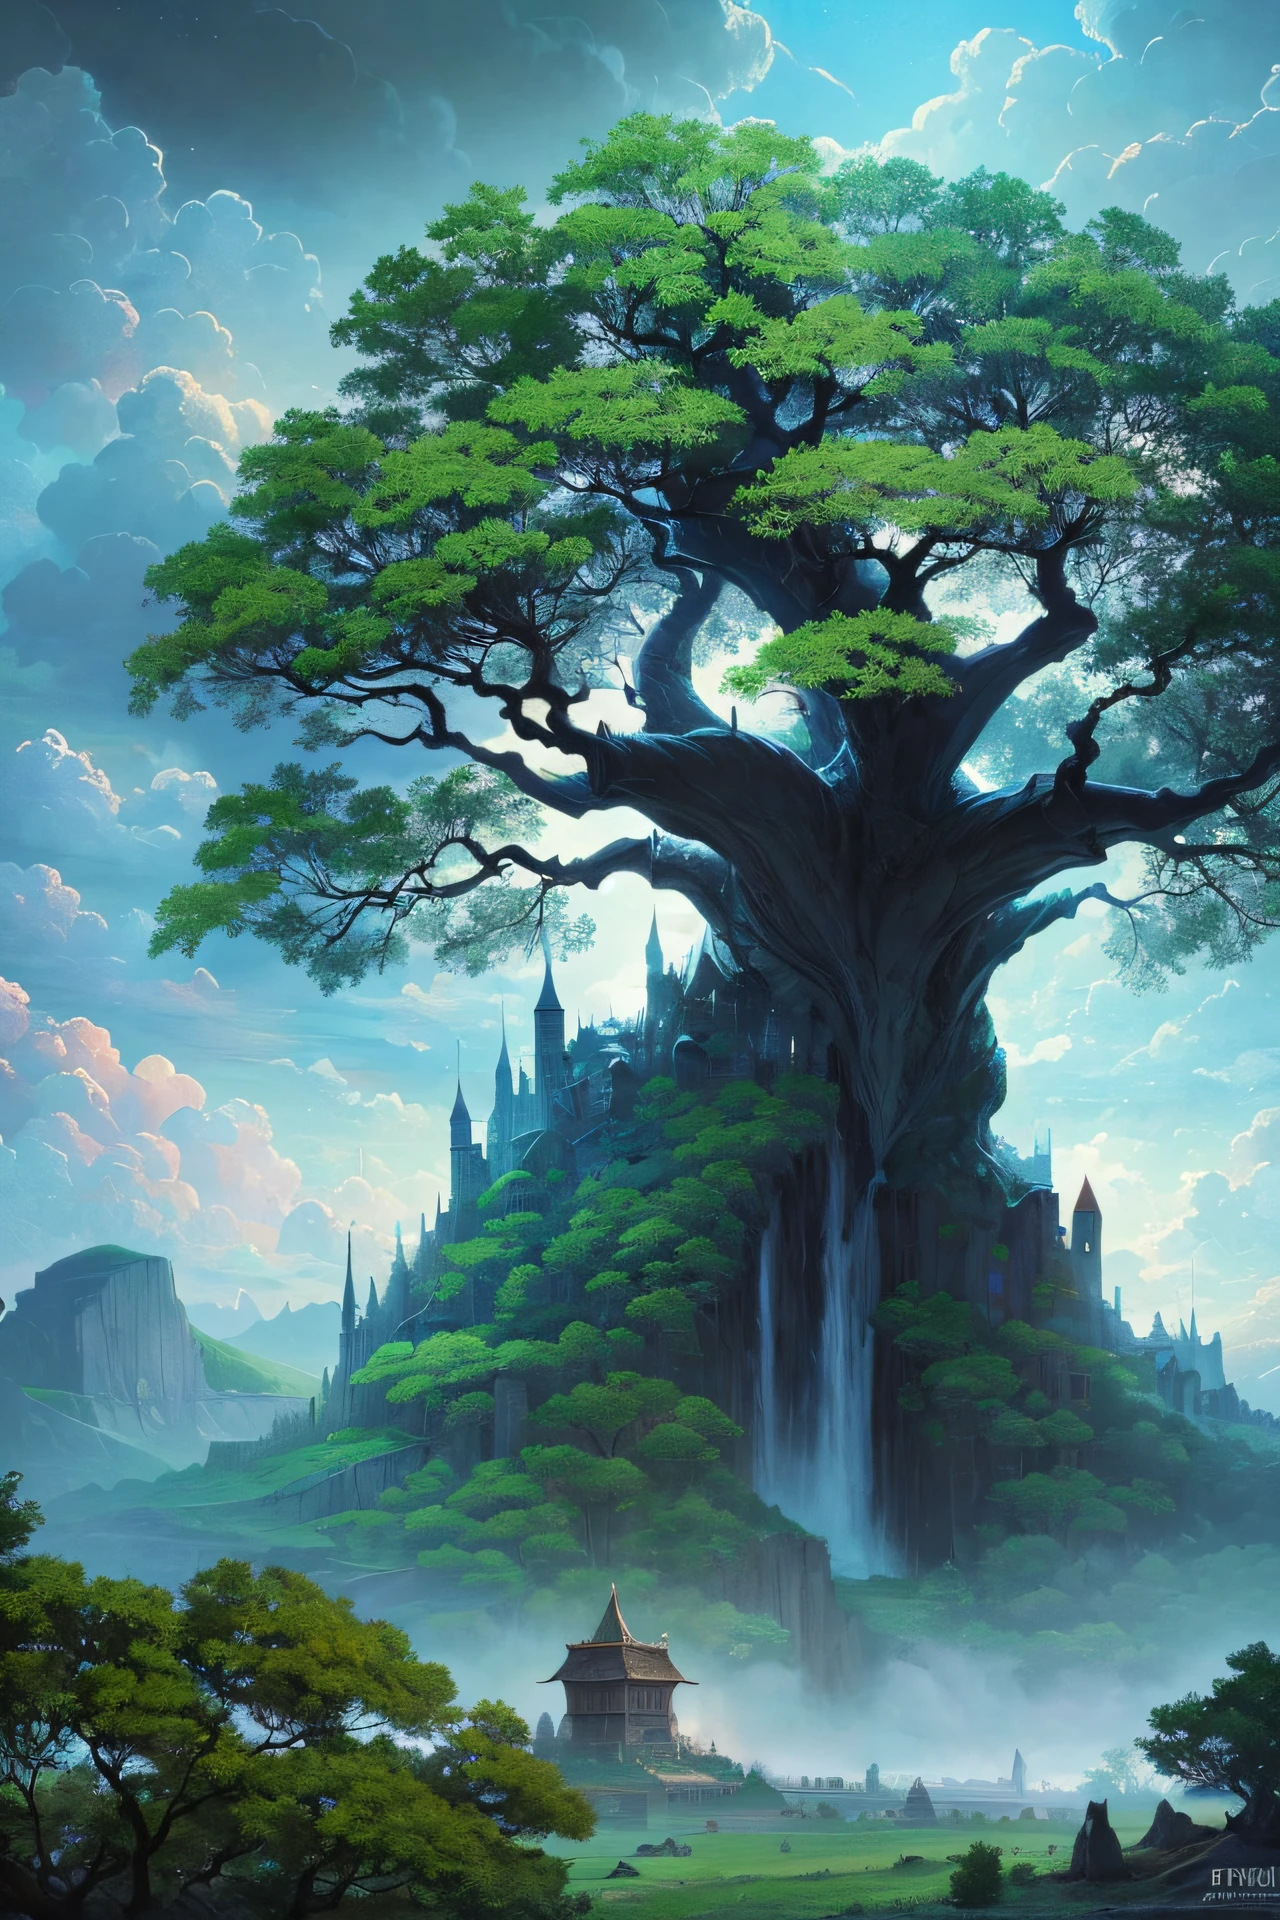 There is a painting of a tree in the middle of the mountain, fractal thunder dan mumford, 4k highly detailed digital art, magic the gathering card art, 8k hd wallpaperjpeg artifact, 8k hd wallpaperjpeg artifact, magic the gathering art, full art, 4K detailed digital art, Symmetrical epic fantasy art, league of legends splashart，Dream painting，world tree，gigantic trees，Divine Tree，fansty world，Blue skies，White clouds floating，big breasts beautiful，large grassland